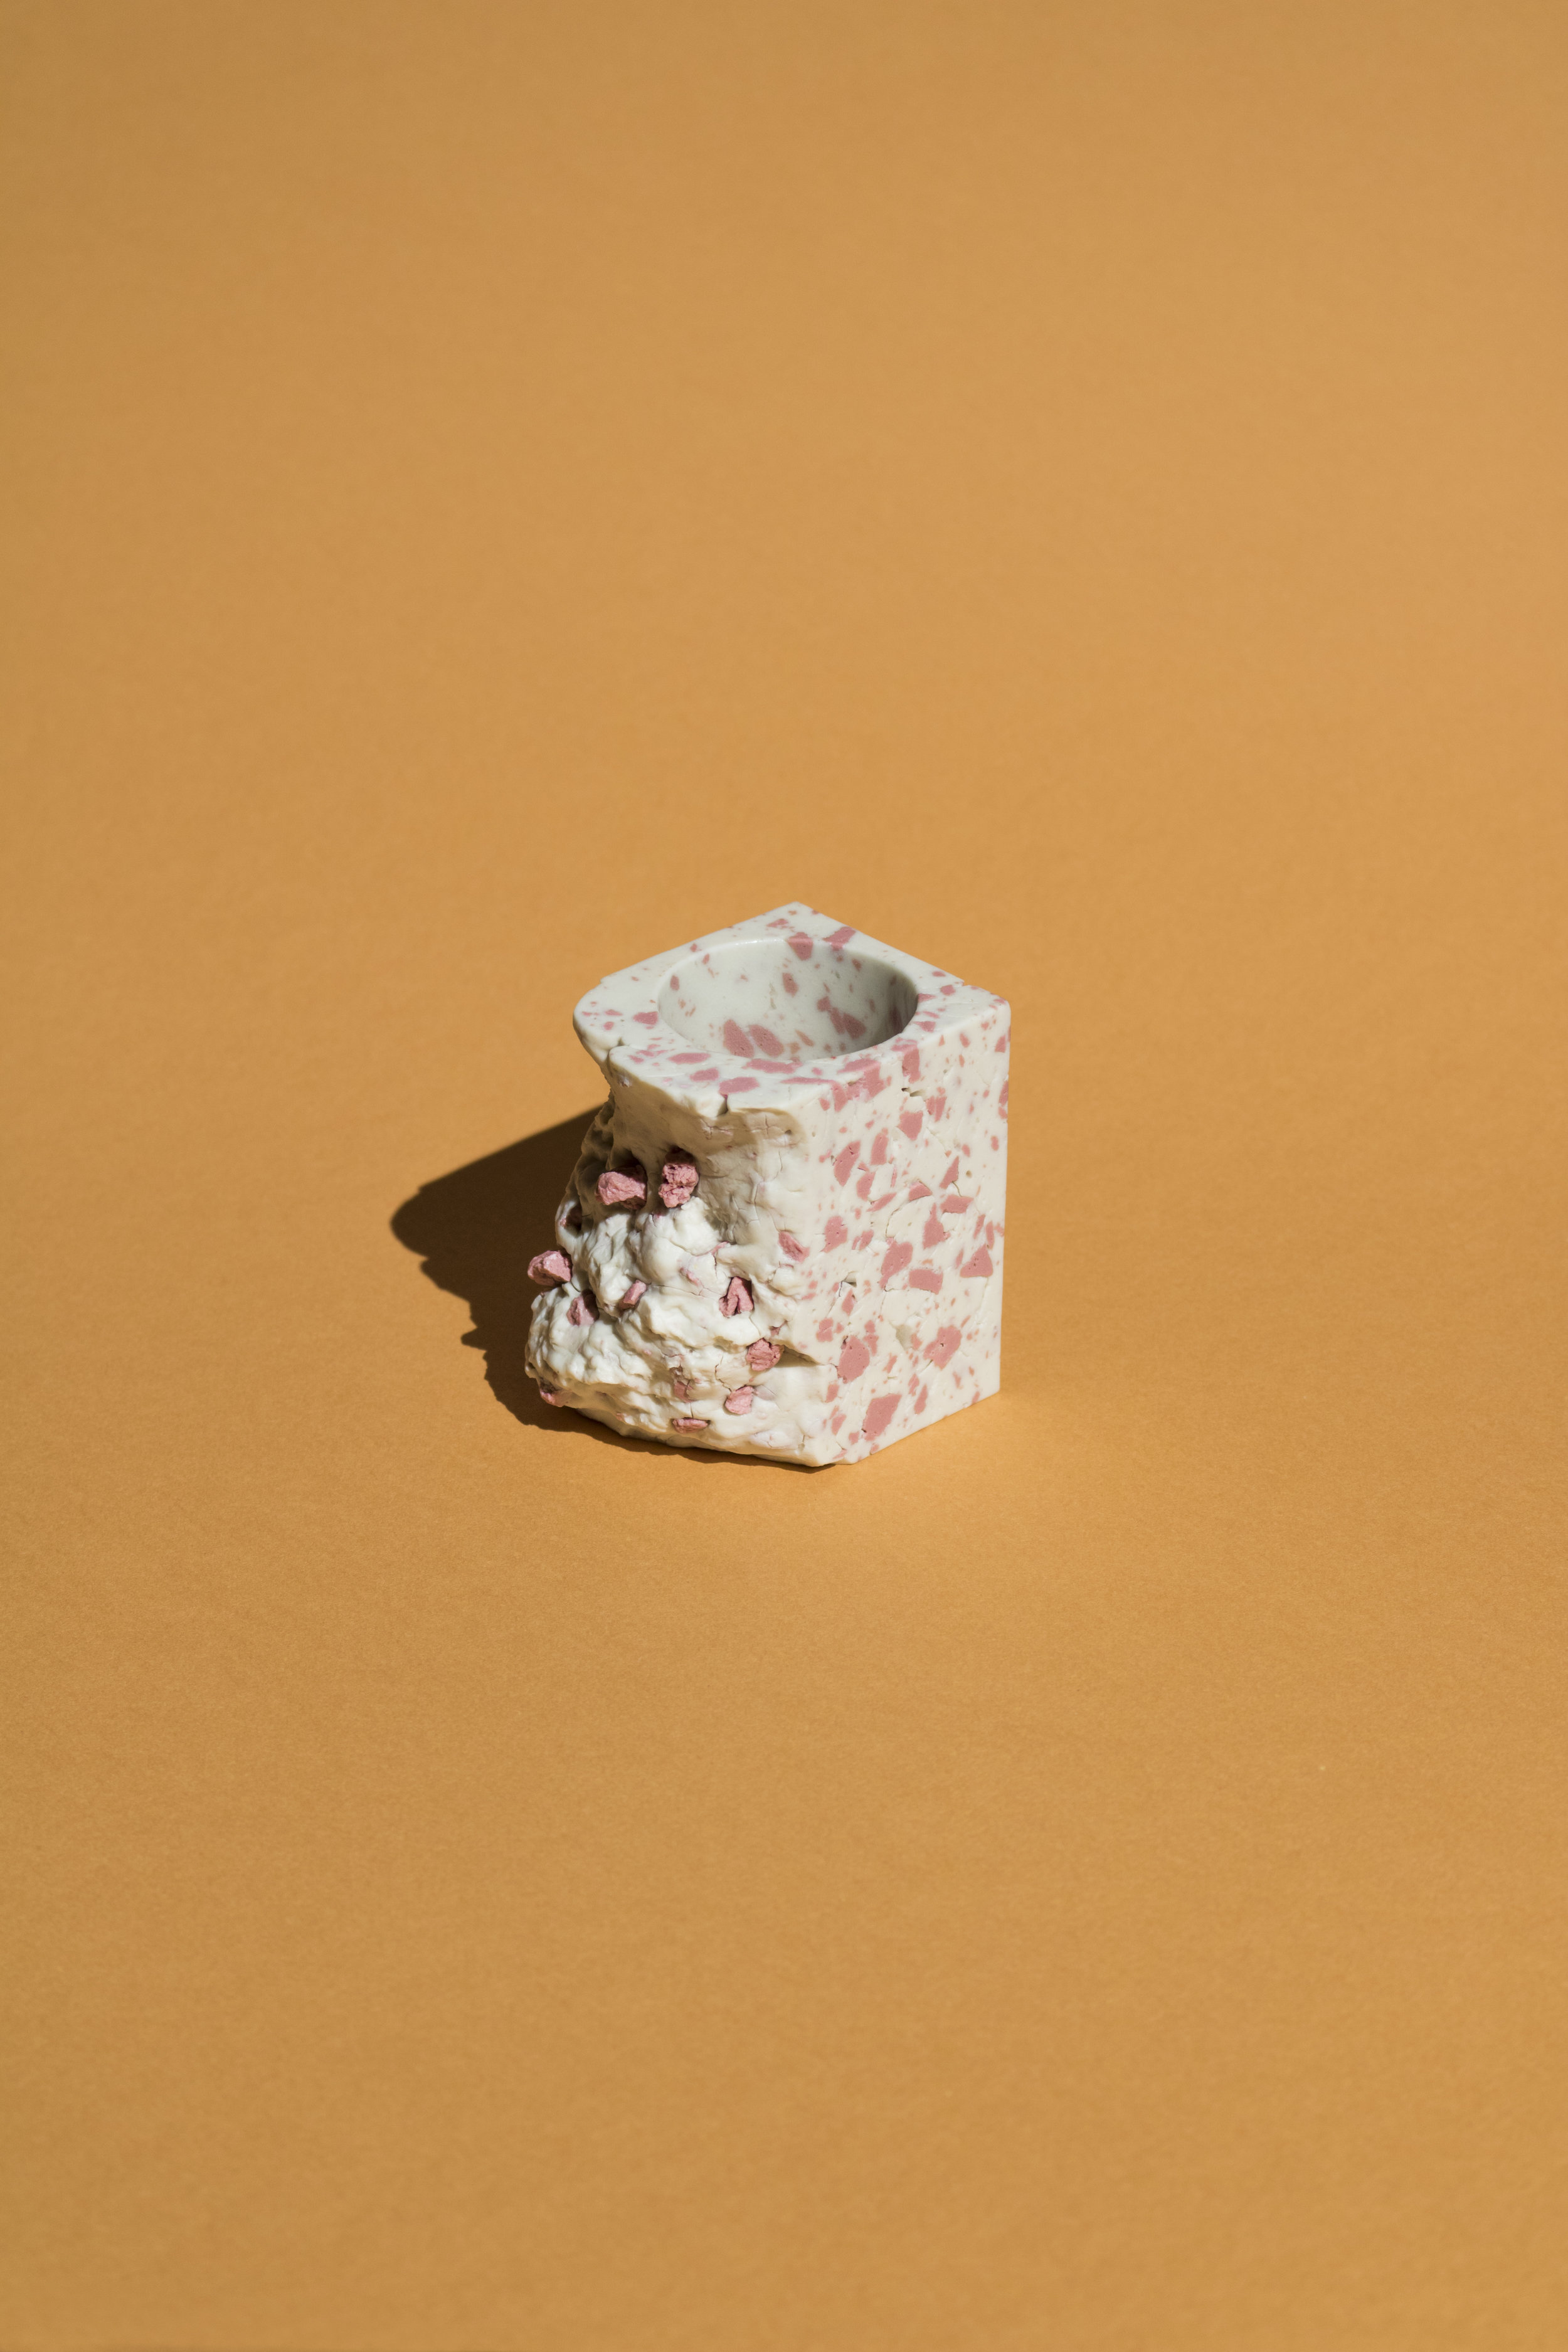  Conglomerate Cup (White):  3x3x2" approx.  Highly Pigmented Porcelain 